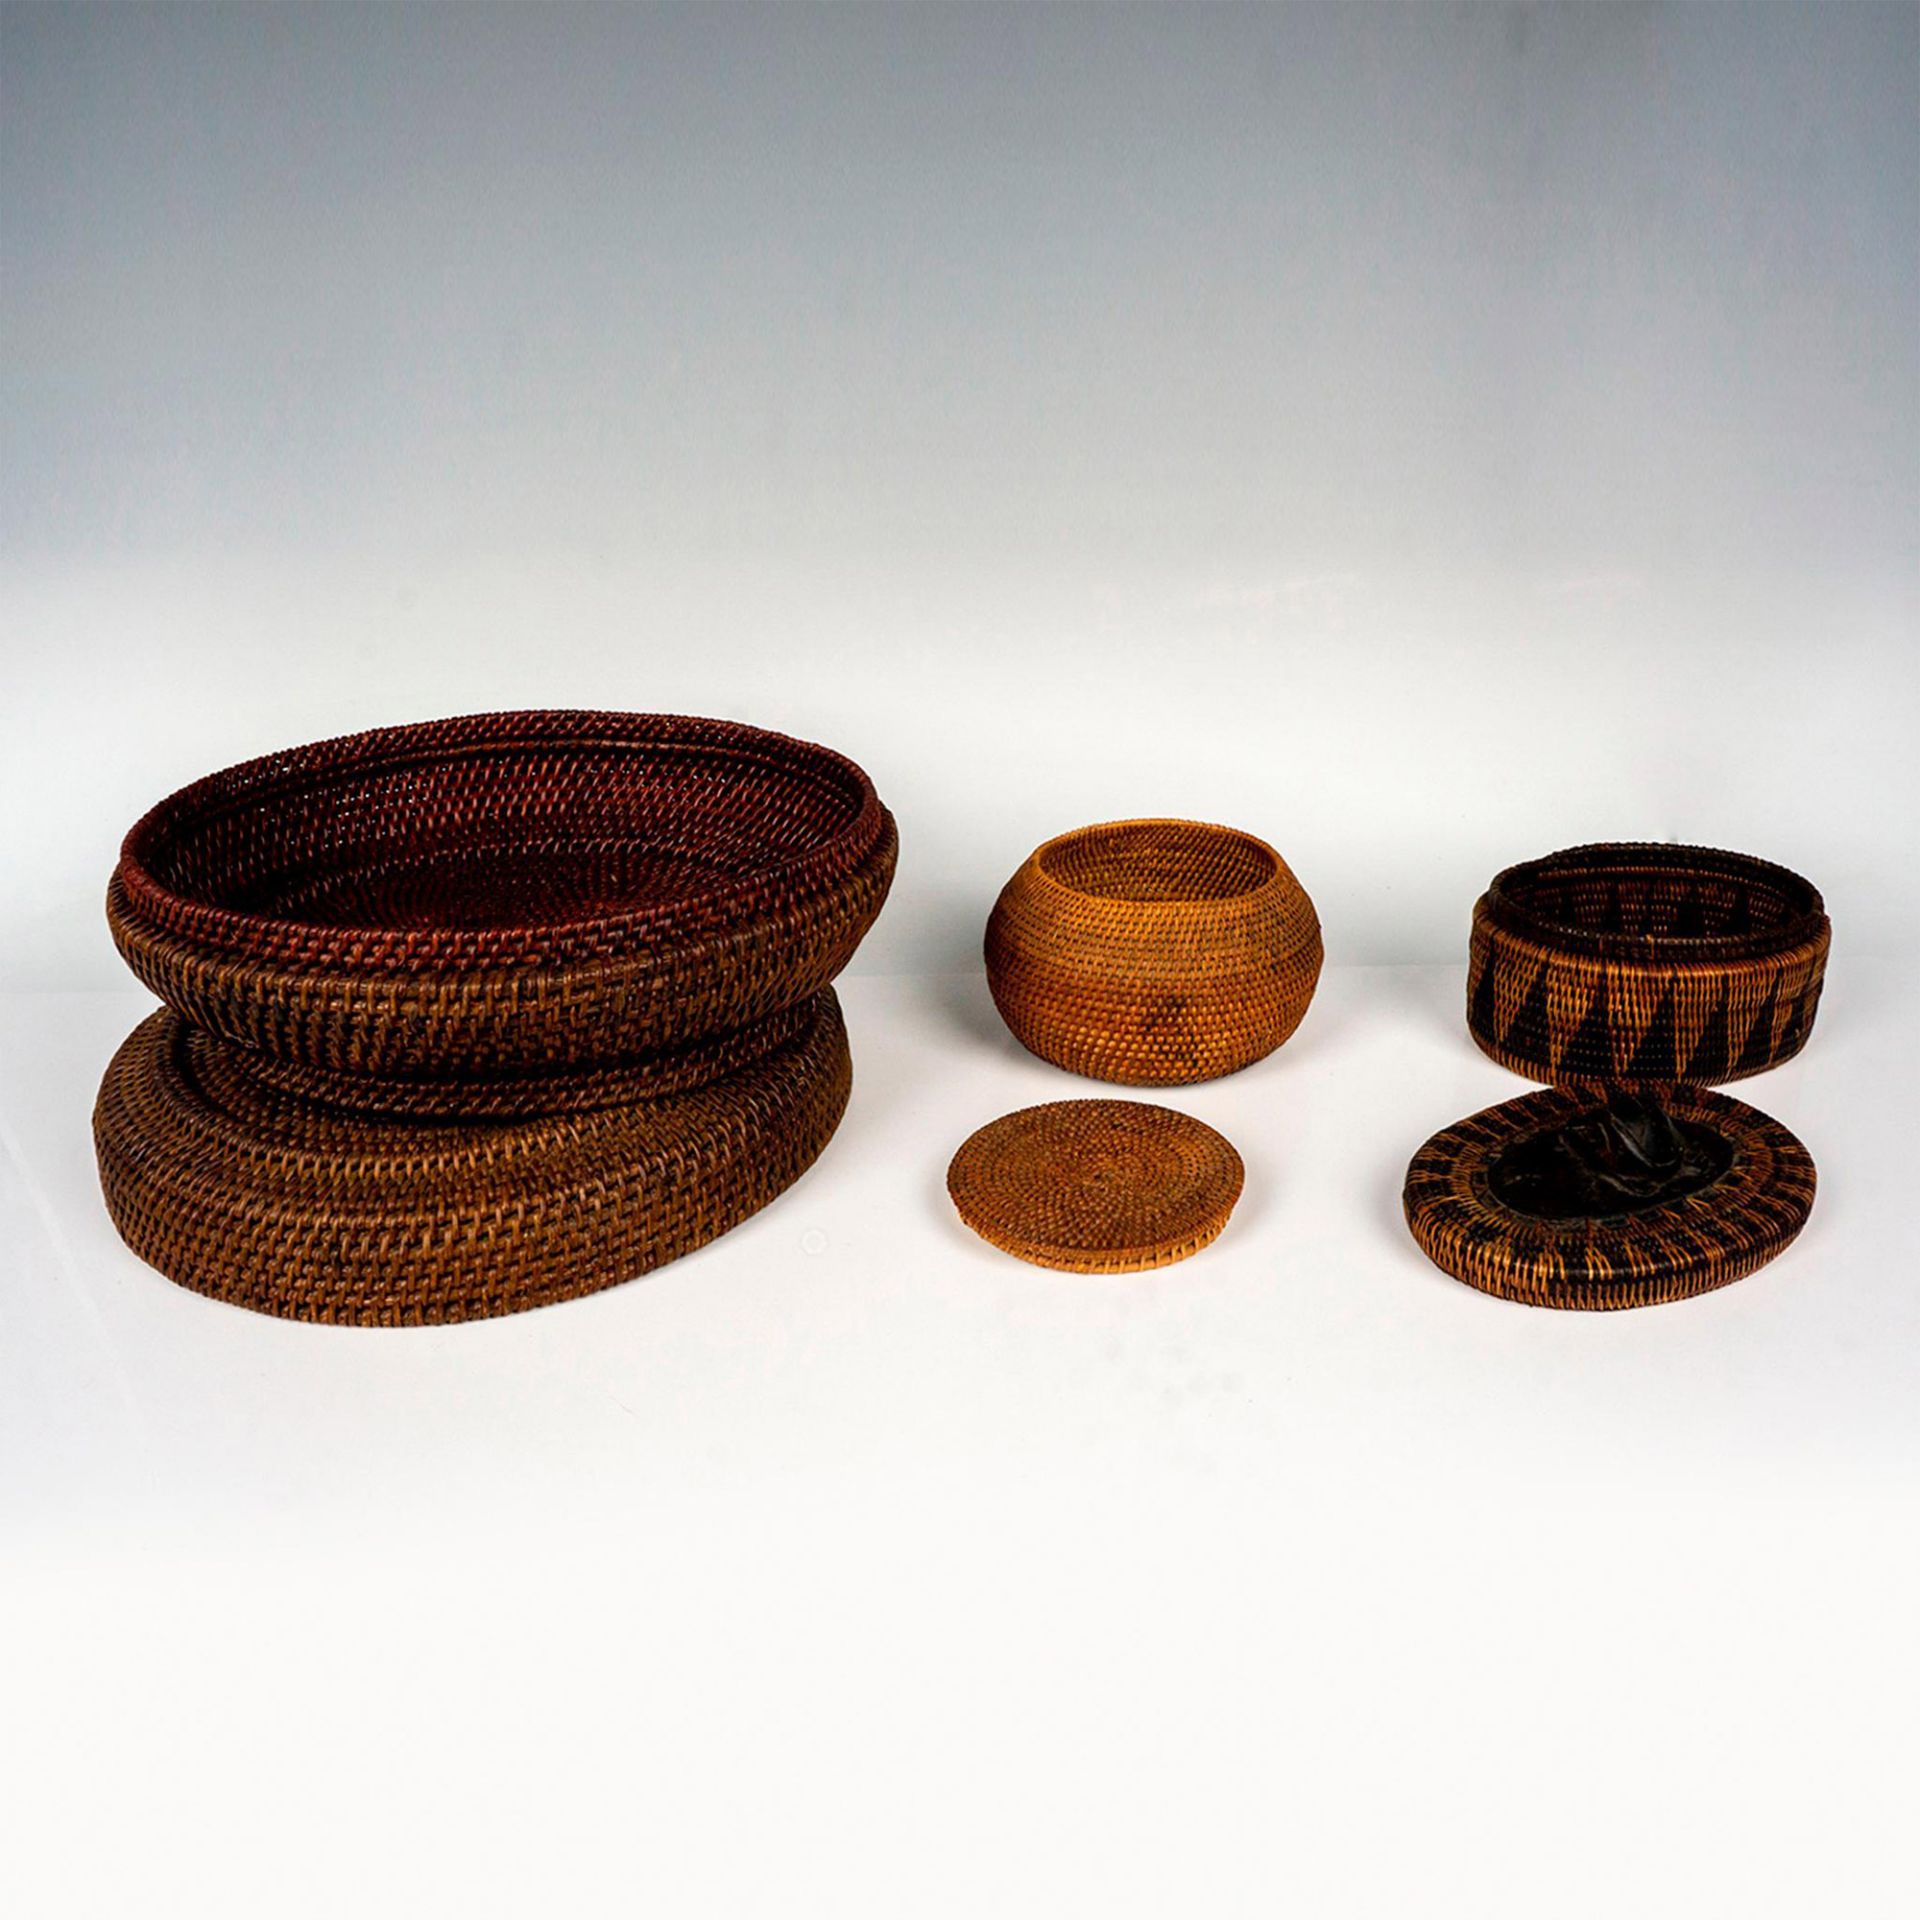 3pc Lidded Woven Rattan Baskets - Image 2 of 3